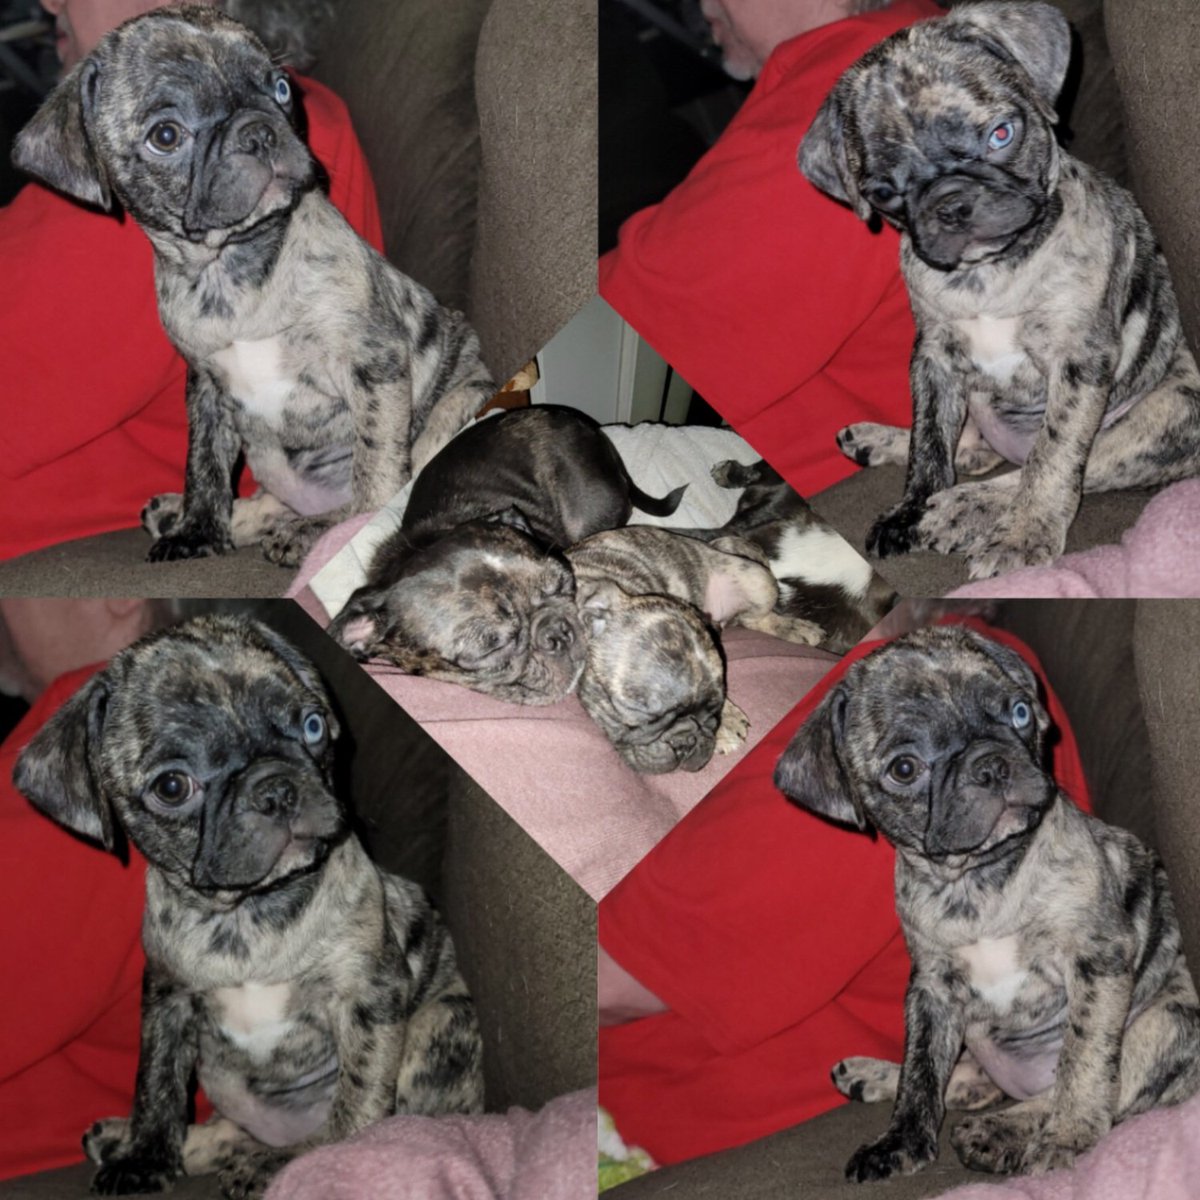 We had the puppies out last night. Myrtle decided she wanted on the couch. Didn't take her long to find Mama. Check out the center picture. Myrtle is still looking for her furever lap.
#pugpartyplusone #frug #frugs #pugs #pug #valentinespecial #valentines #valentinesgift #puppies